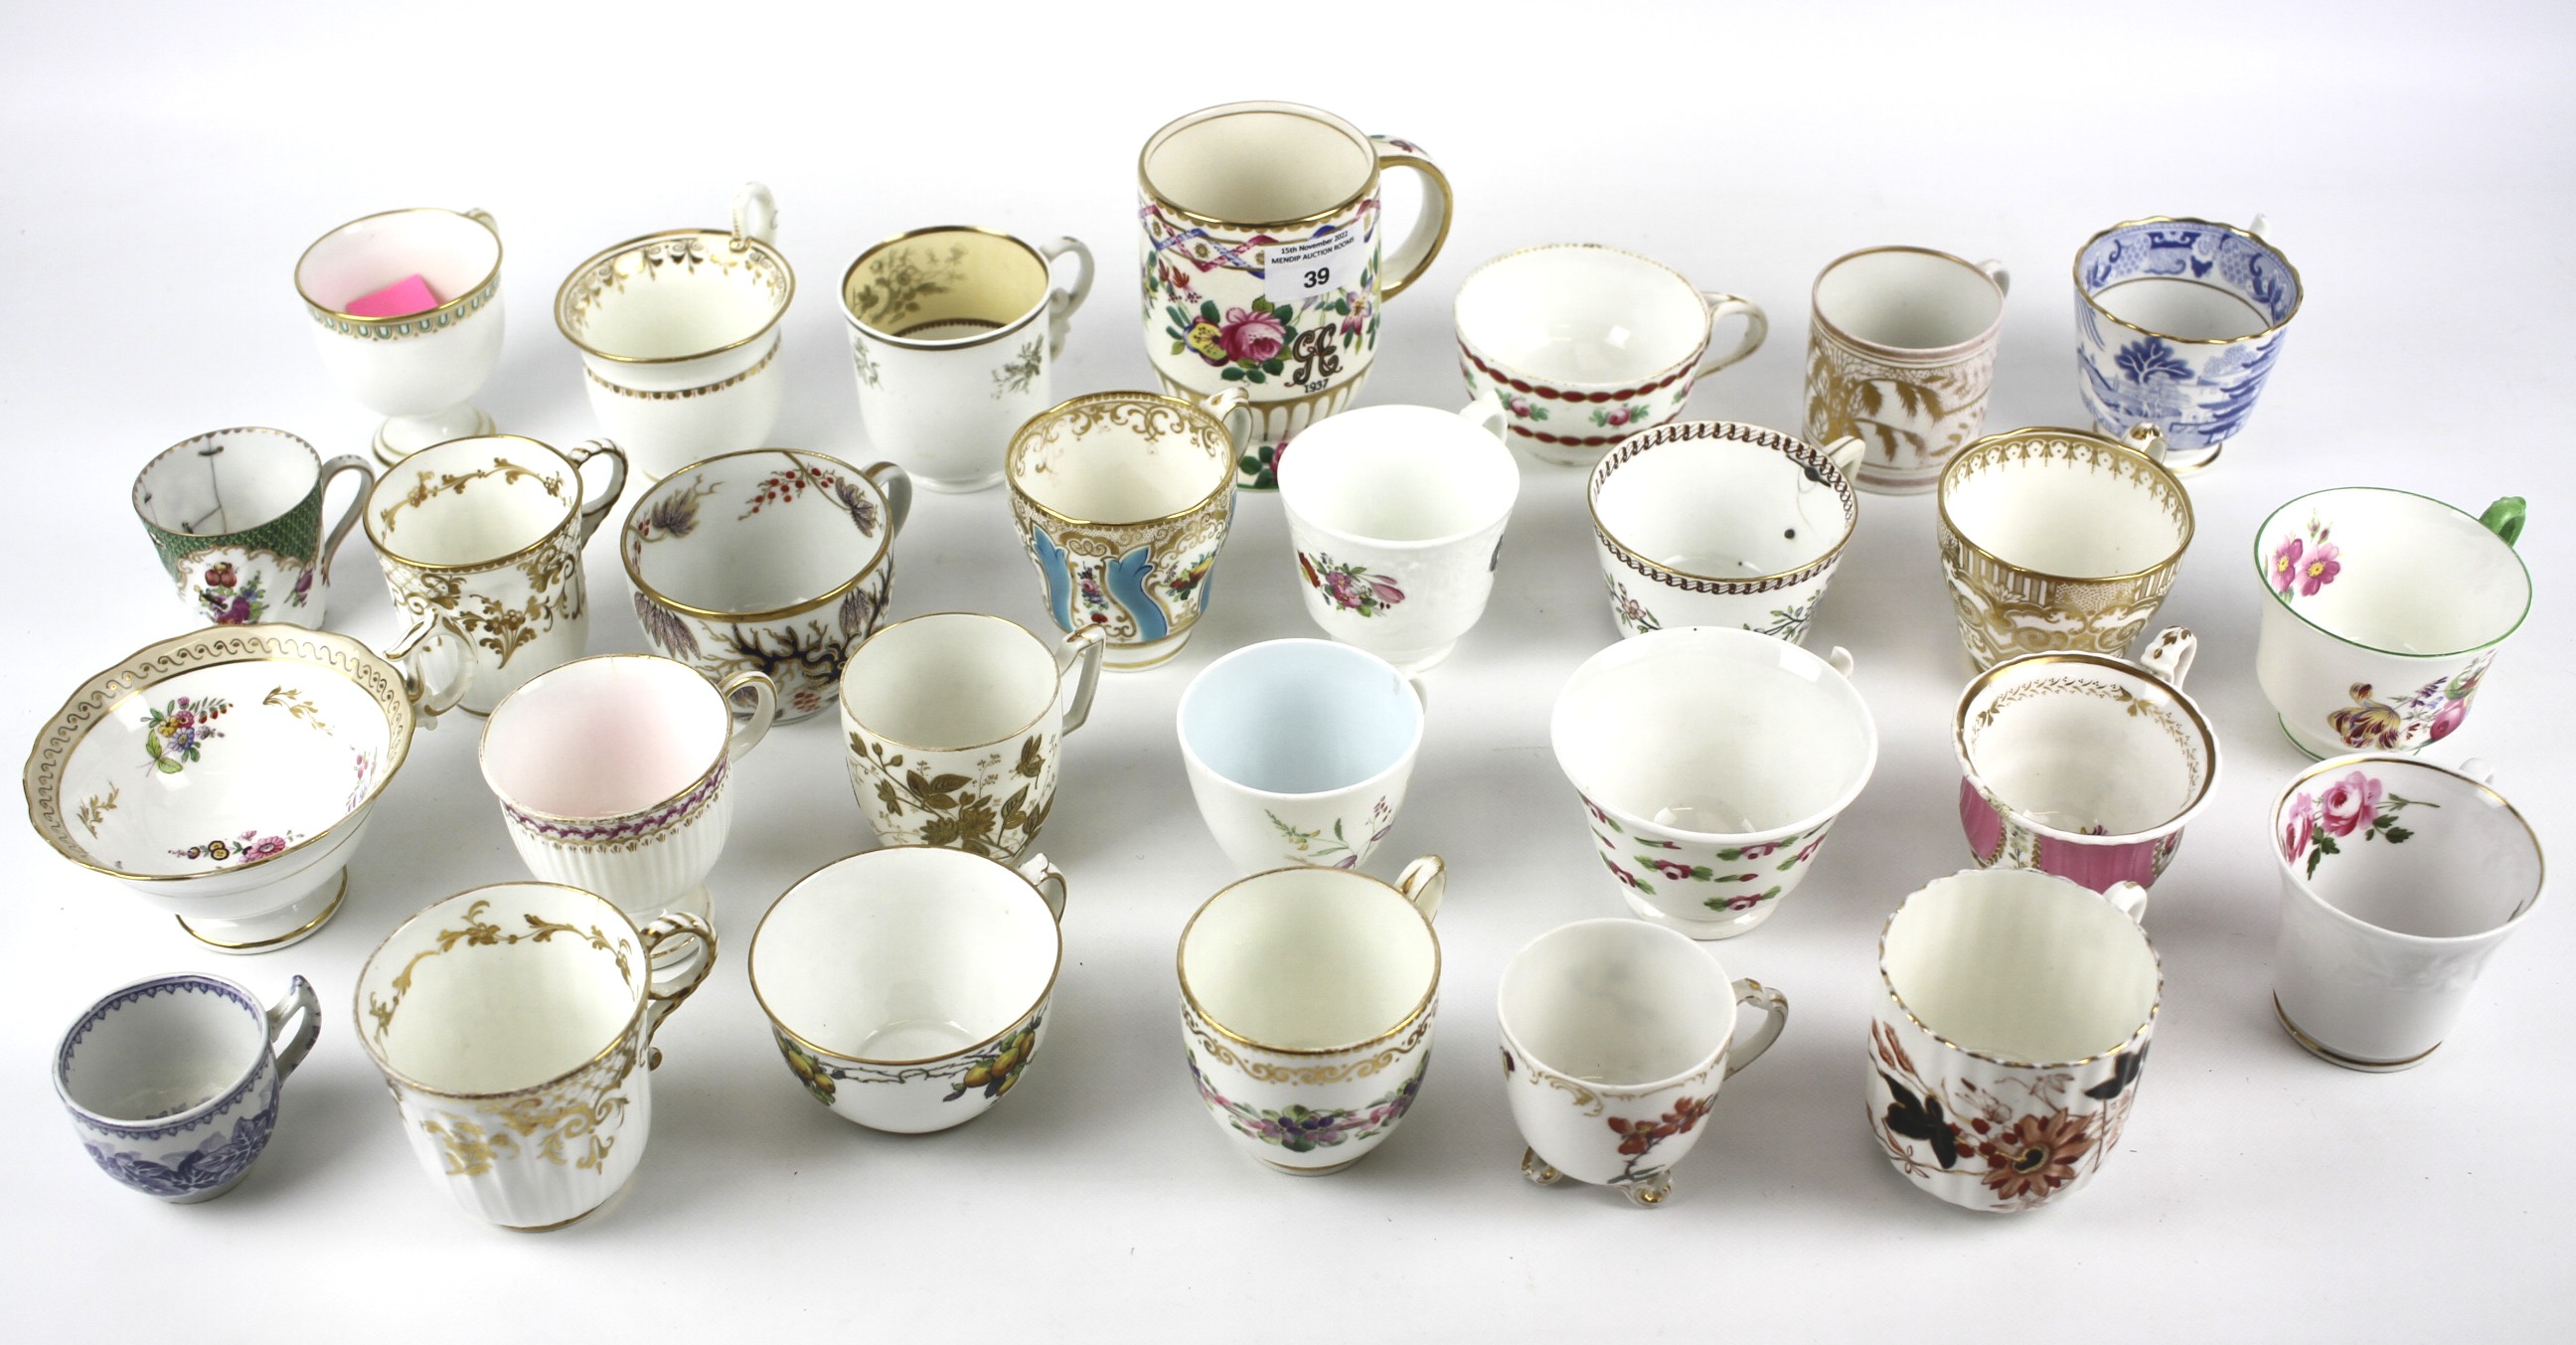 A large collection of 19th century and later ceramic and porcelain tea cups.